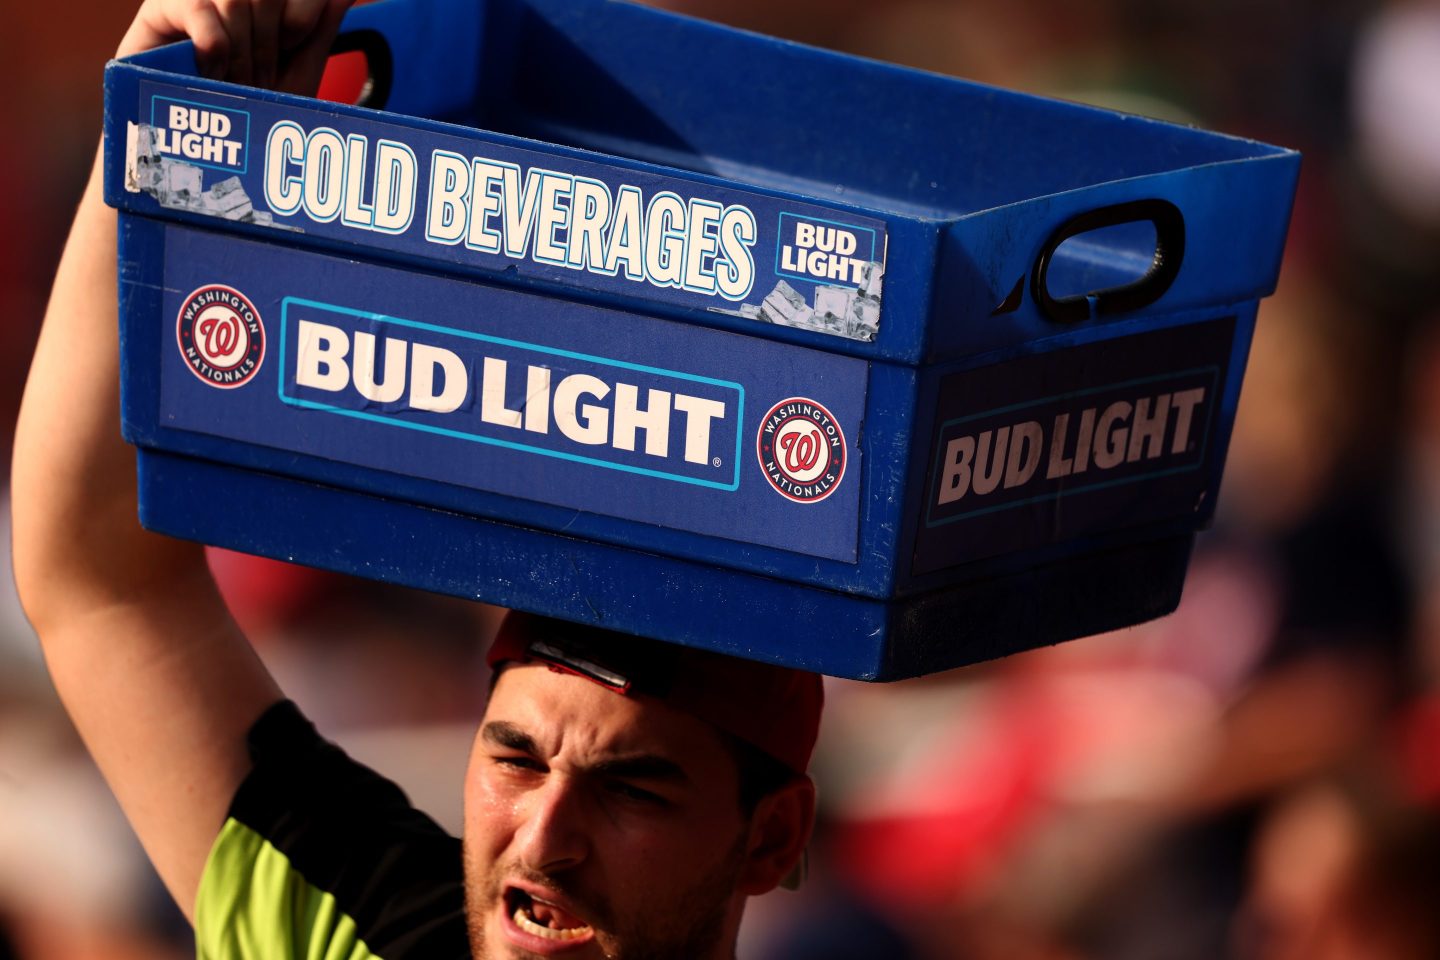 A new Anheuser-Busch promotion offers consumers $15 off a case of Bud Light for the July 4th holiday weekend.